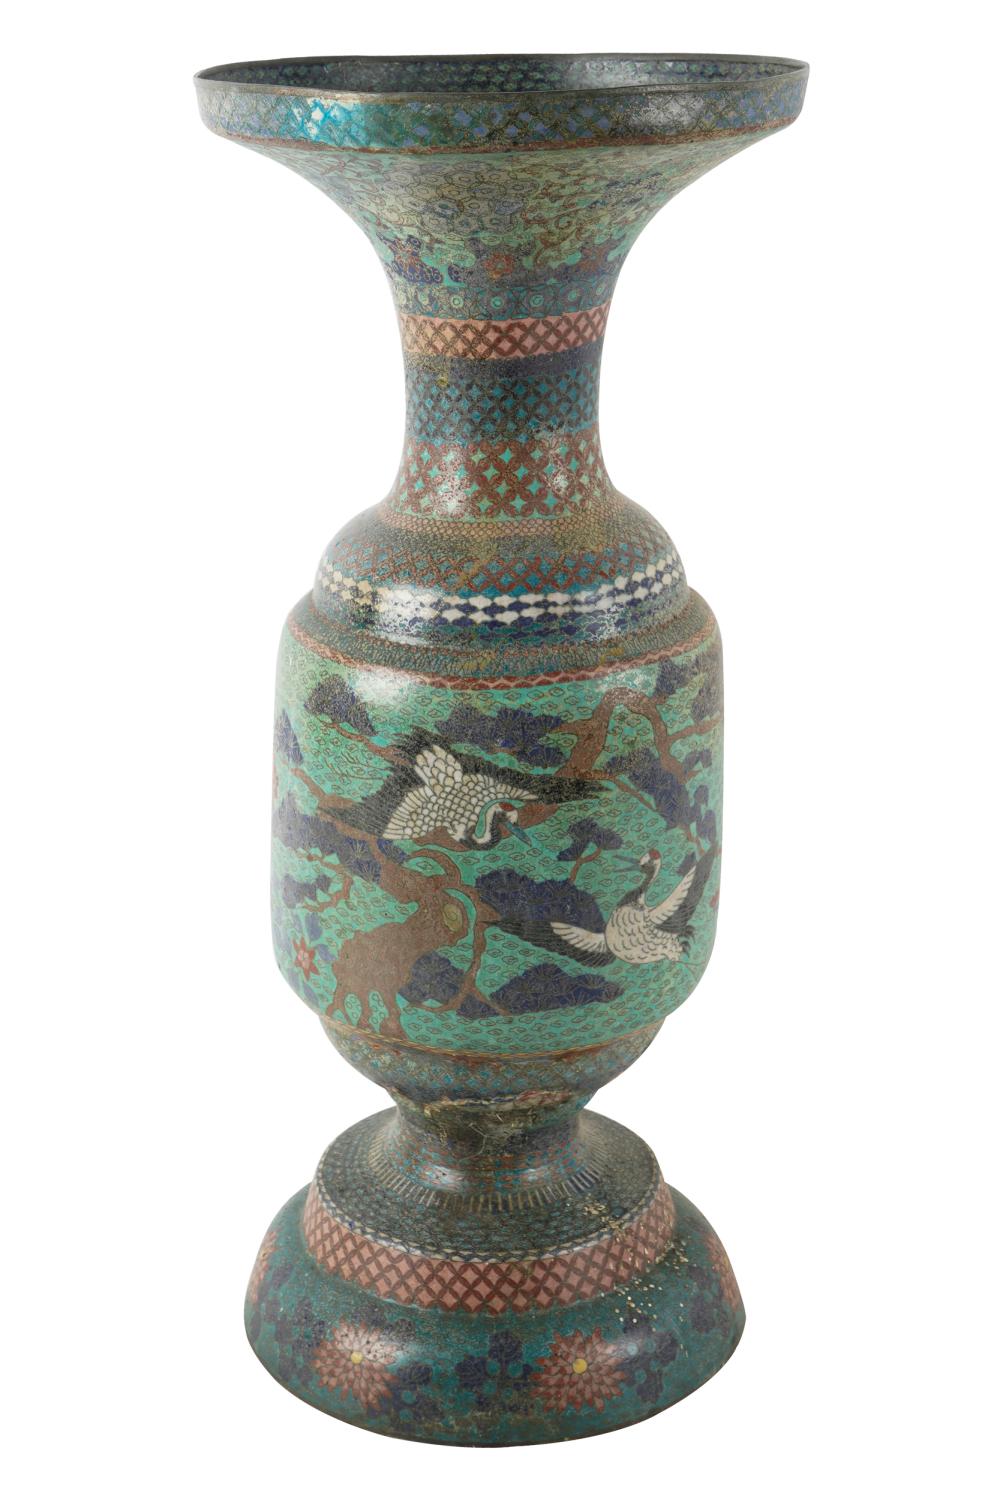 CLOISONNE VASEwith bird and floral